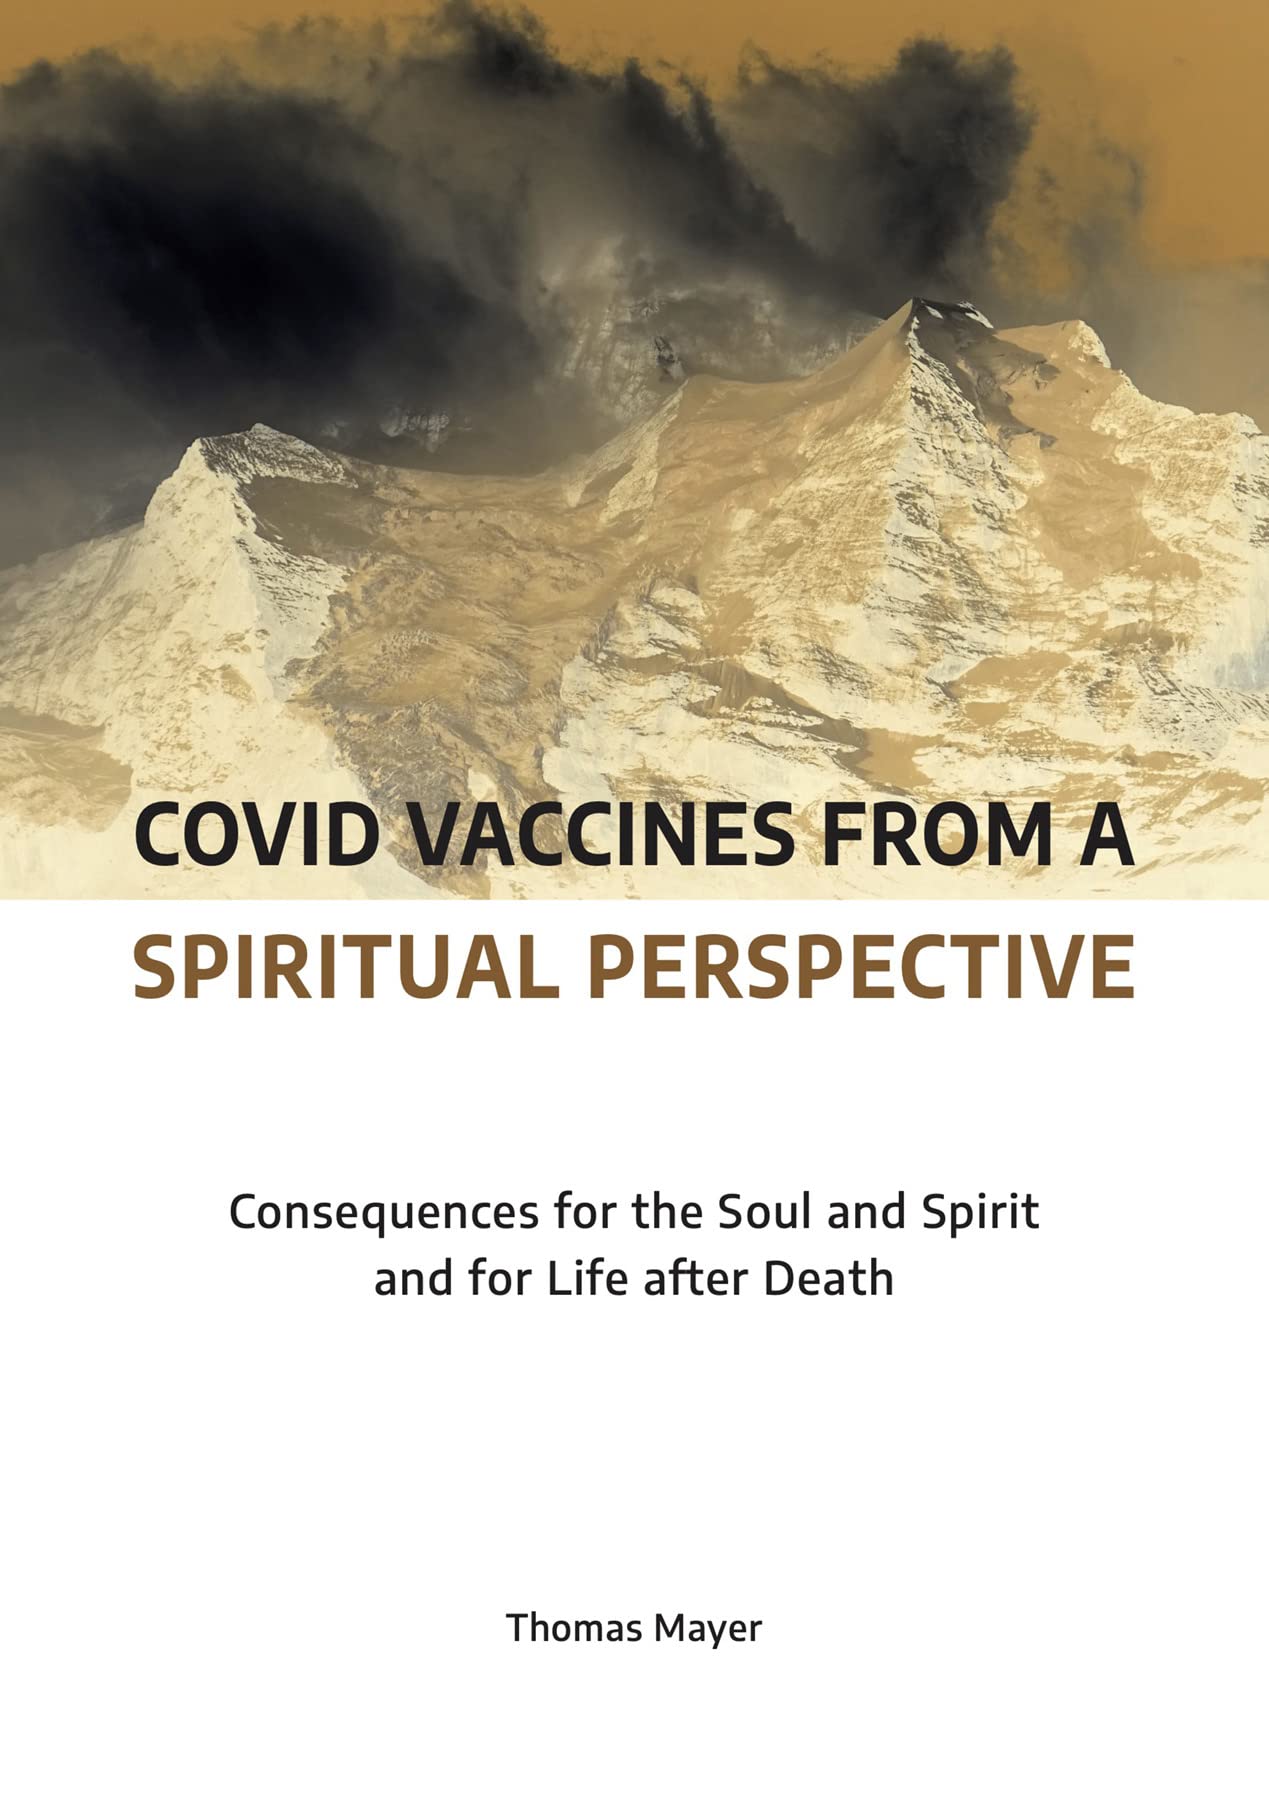 Covid Vaccines from_ a Spiritual Perspective: Consequences for the Soul and Spirit and for Life after Death  by  Thomas Mayer